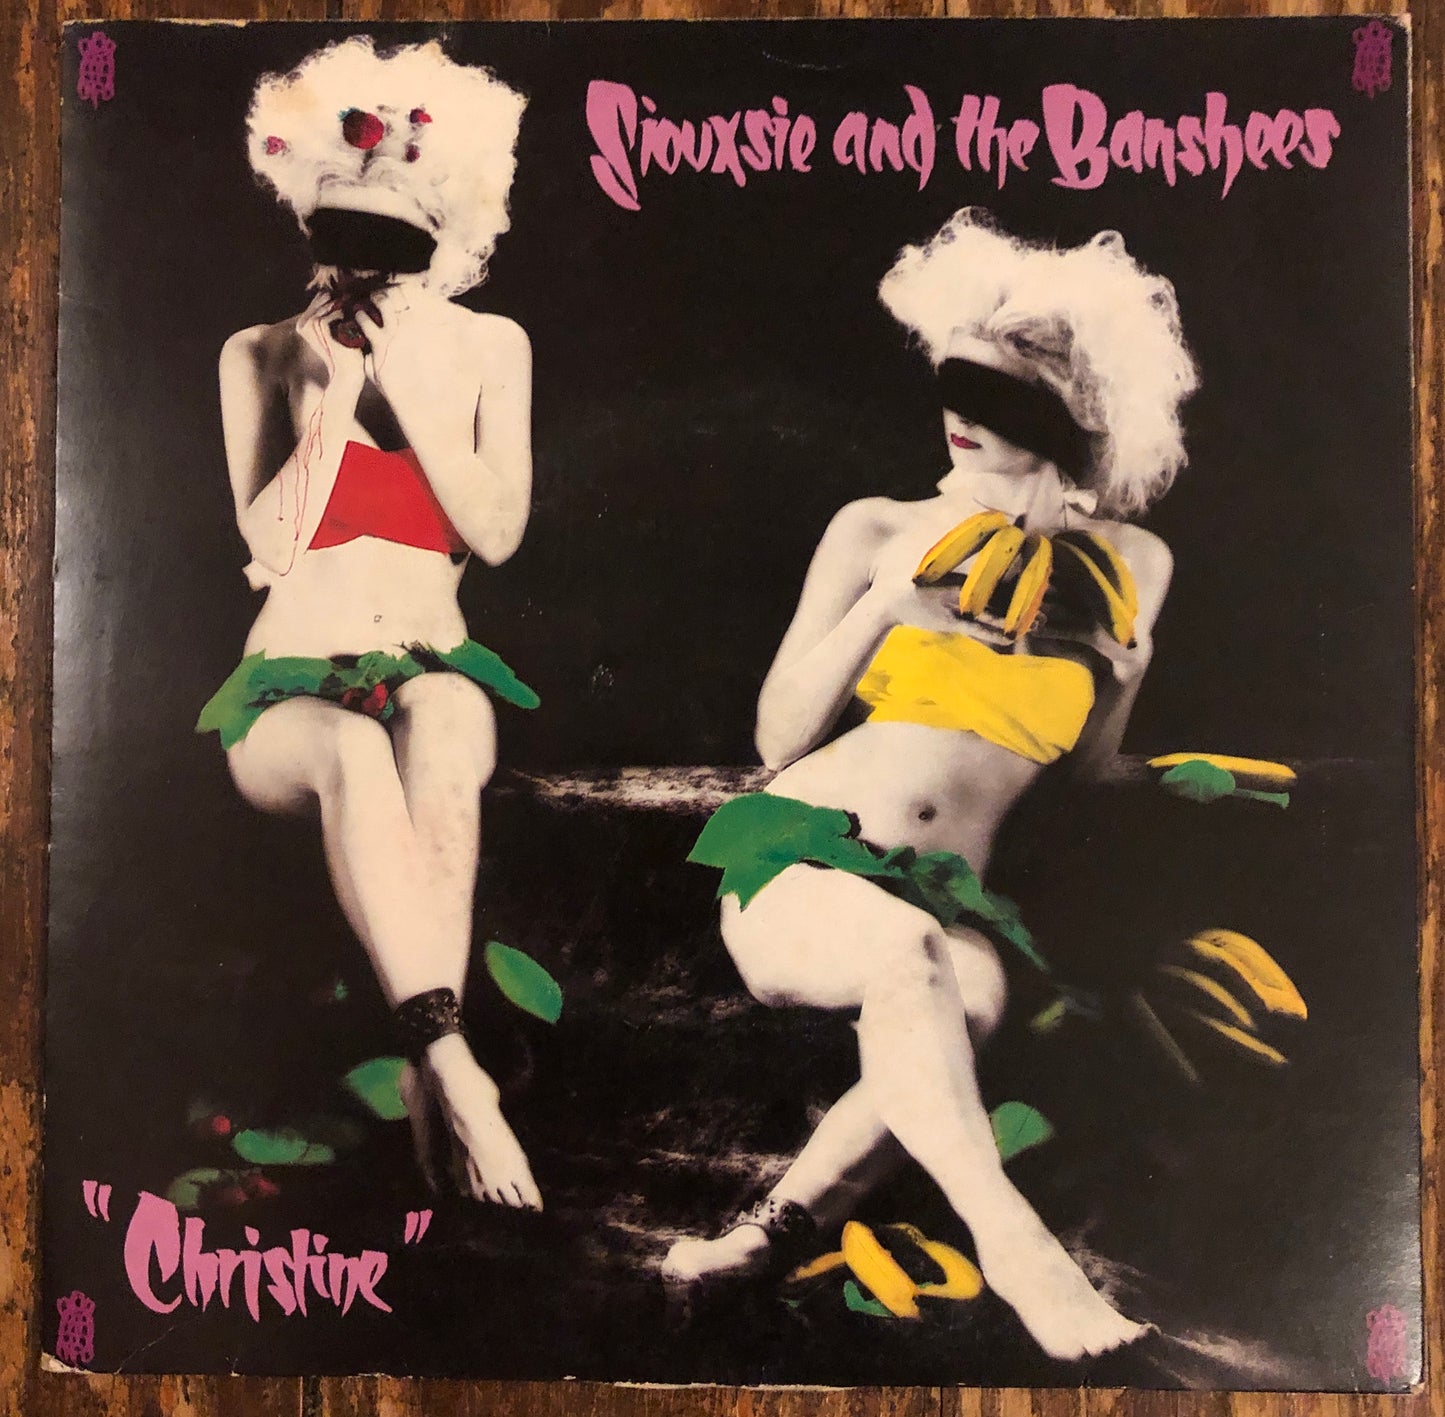 SIOUXSIE AND THE BANSHEES "Christine"